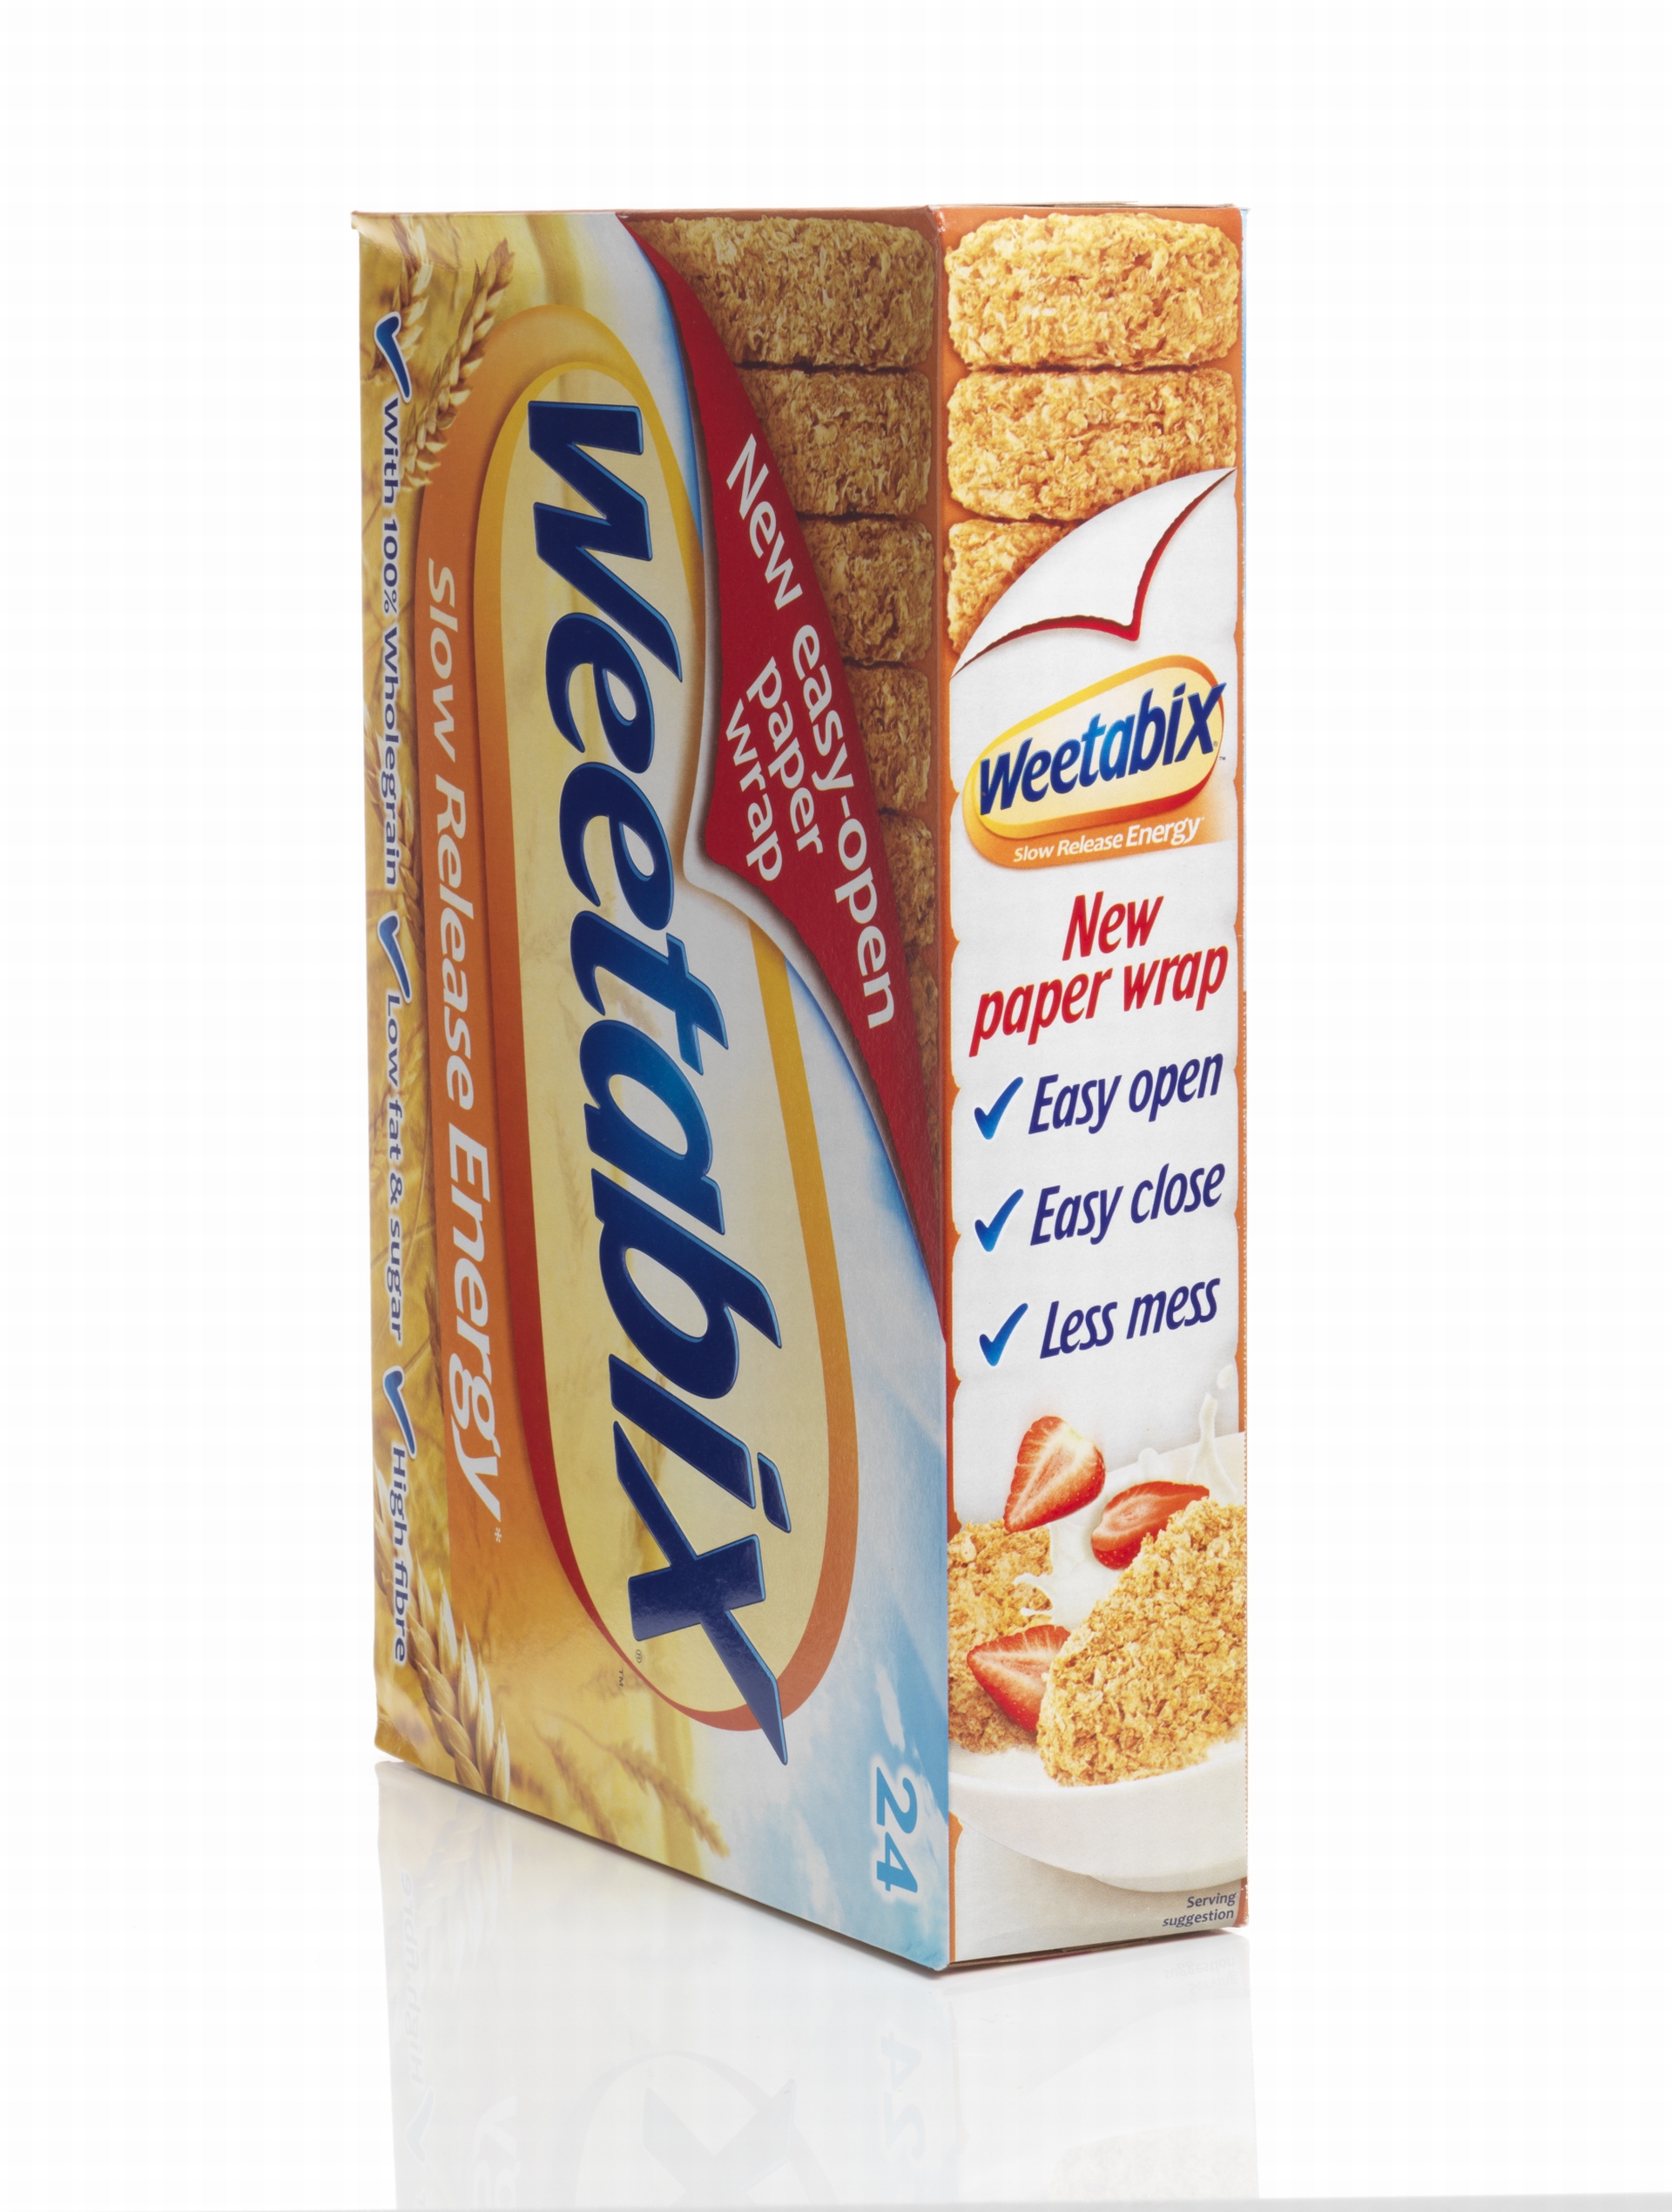 Weetabix packaging becomes 100% recyclable